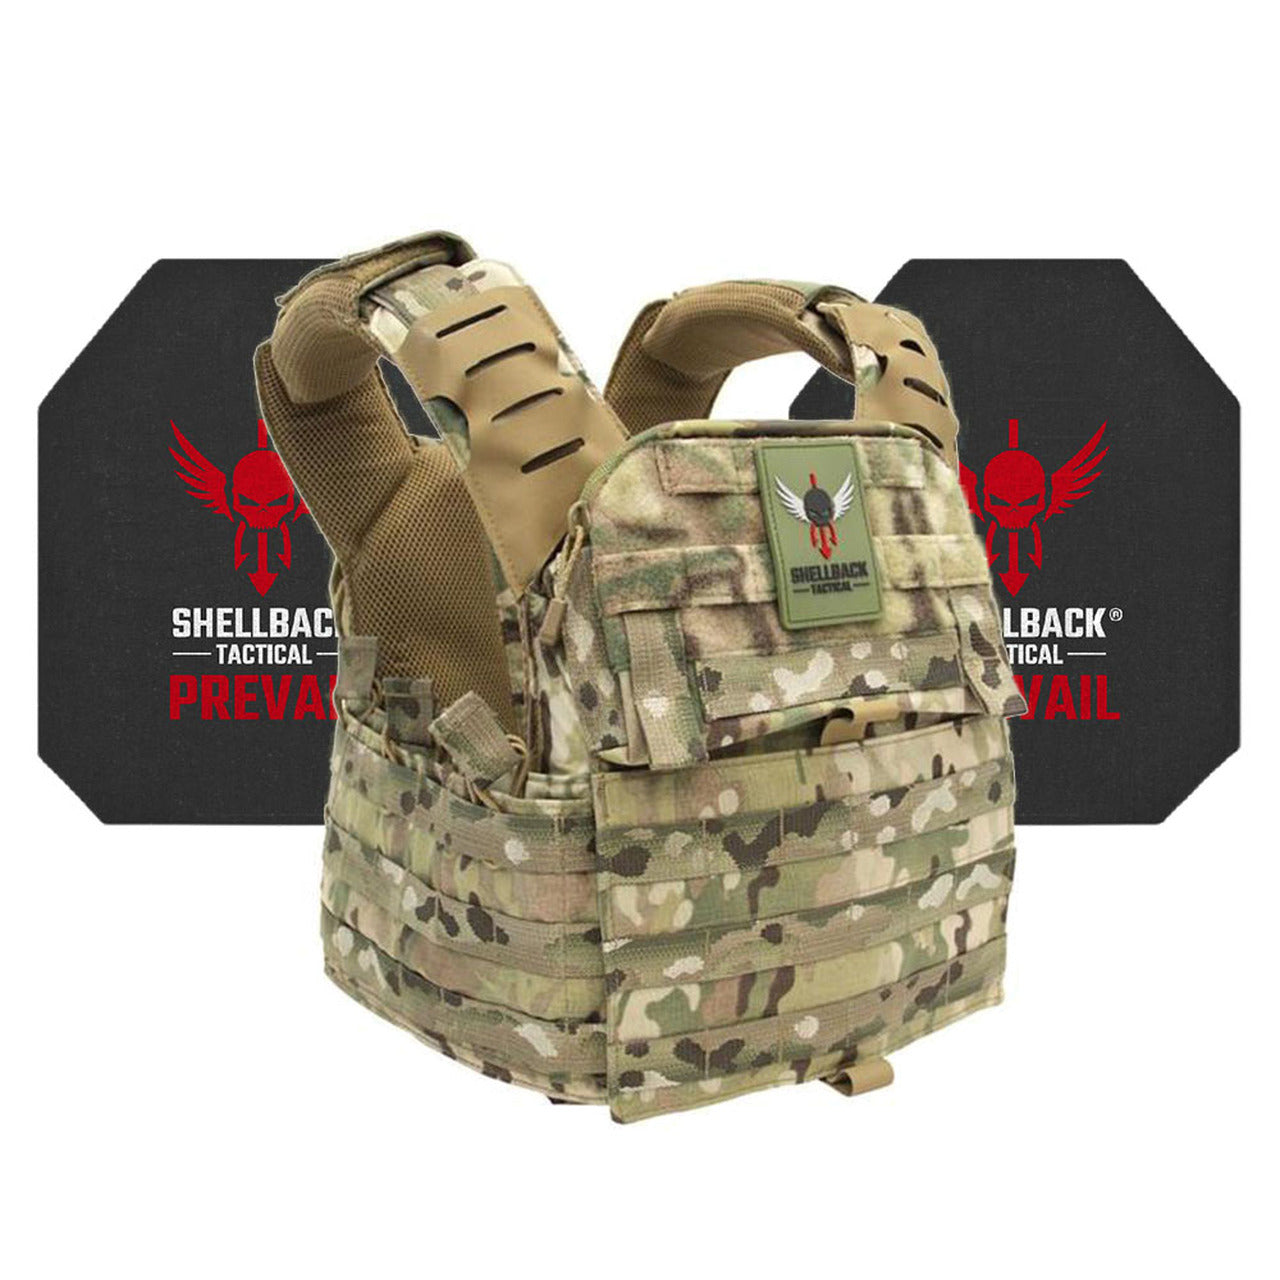 A Shellback Tactical Banshee Elite 2.0 Active Shooter Kit with Level IV Model 4S17 Armor Plates plate carrier with a holster on it.